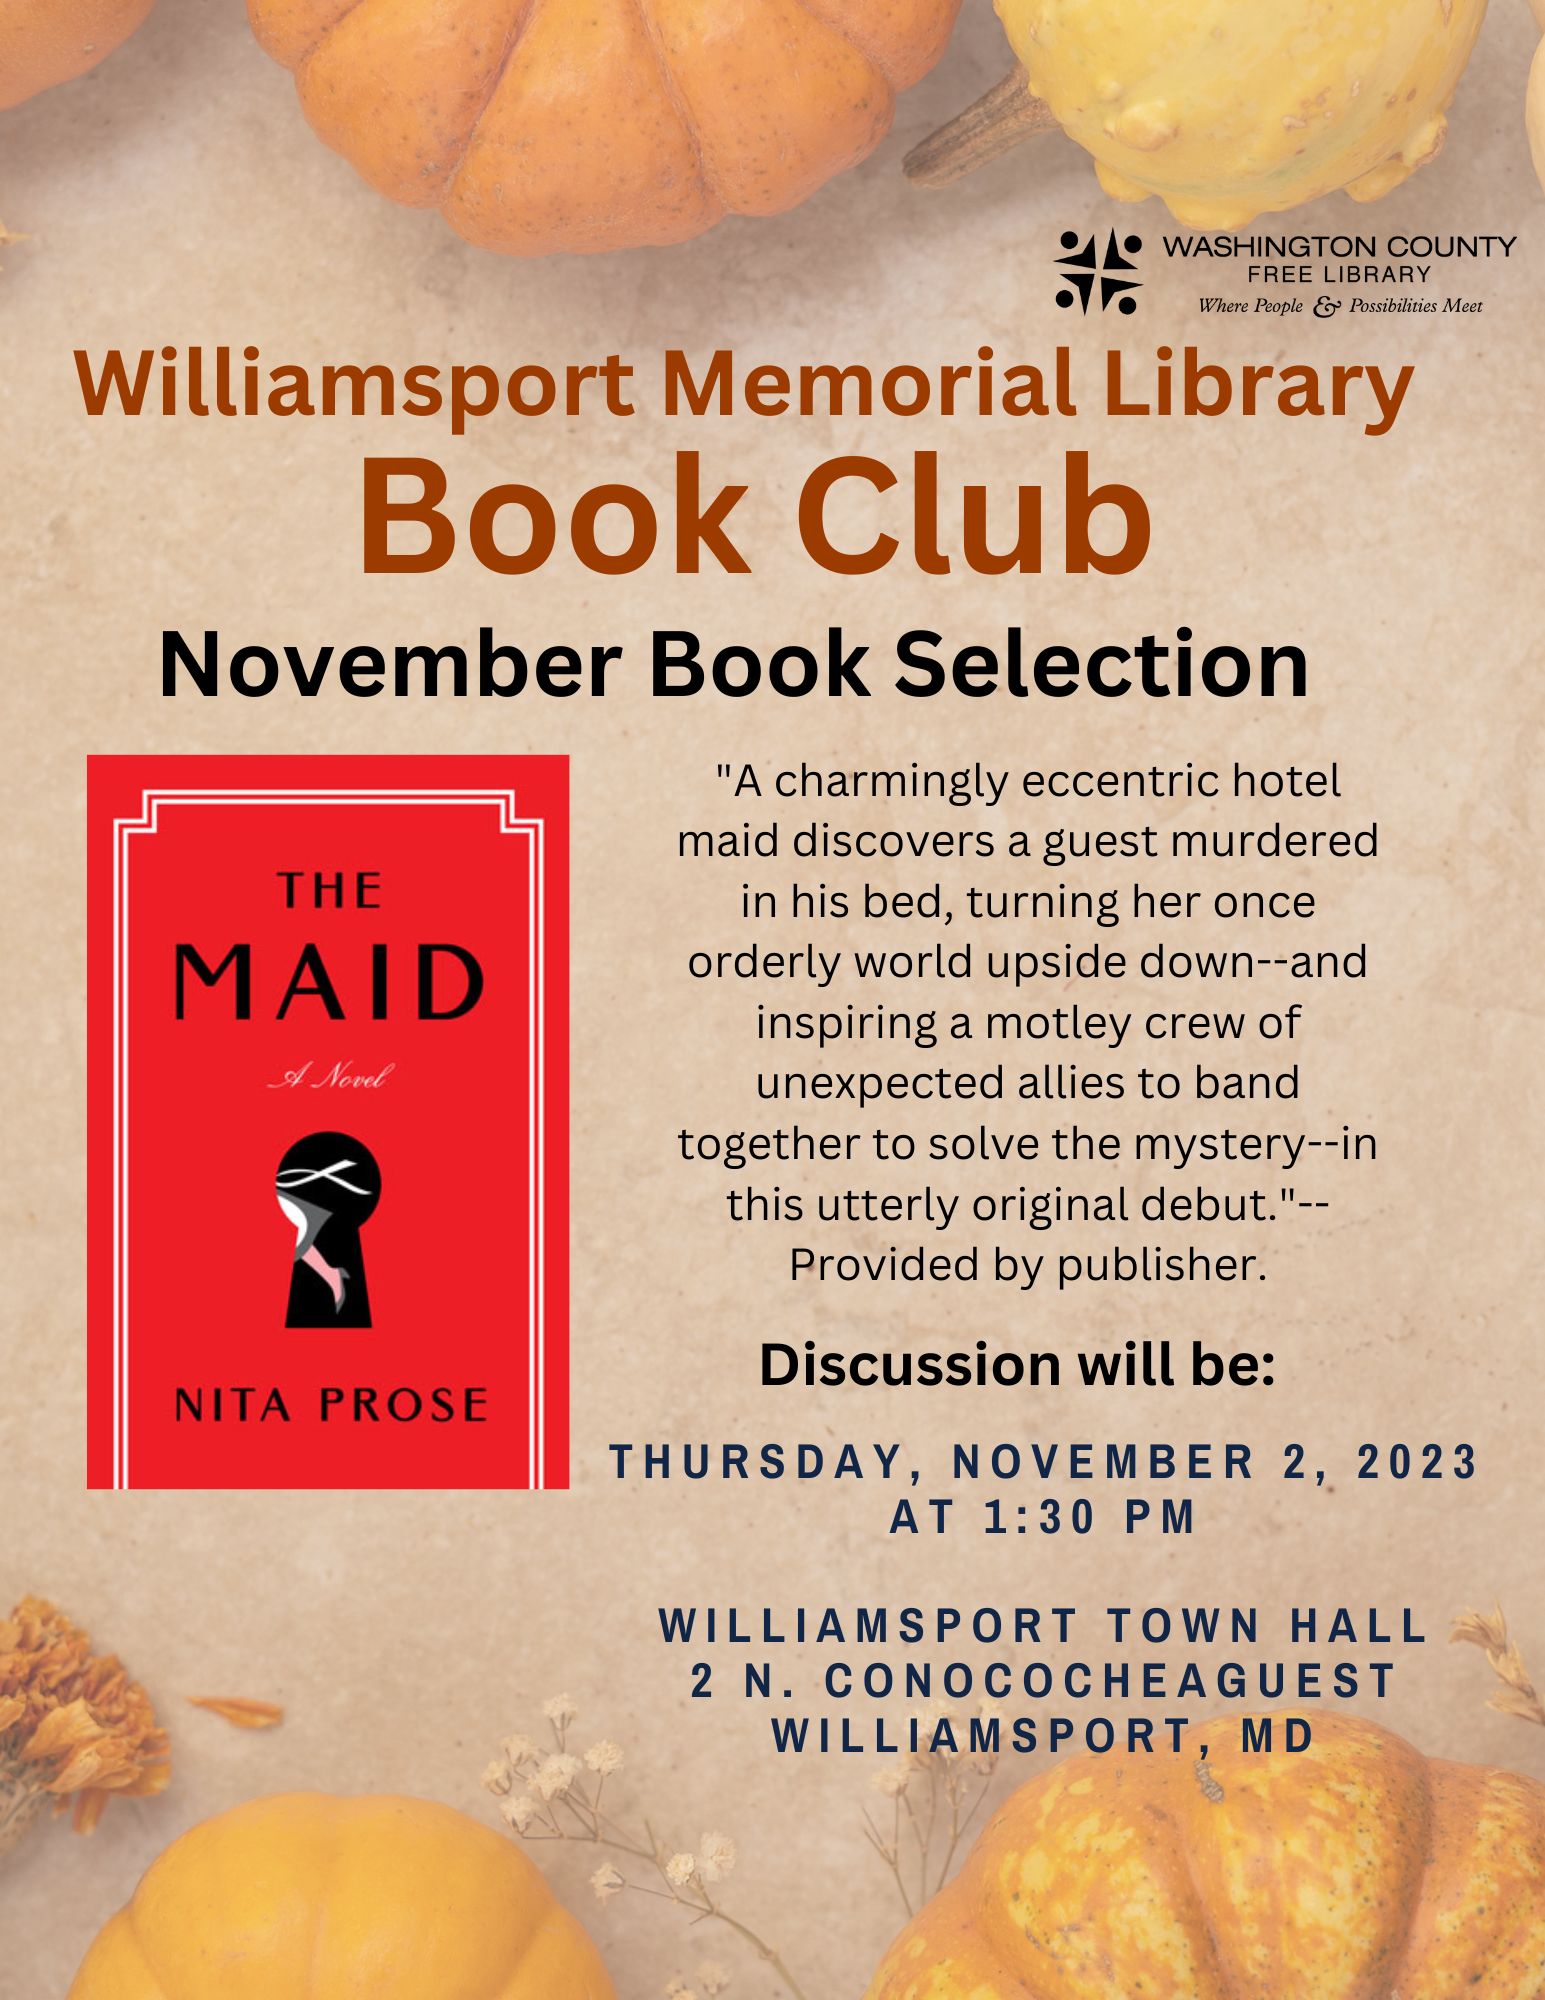 The Maid book club selection for November 2023